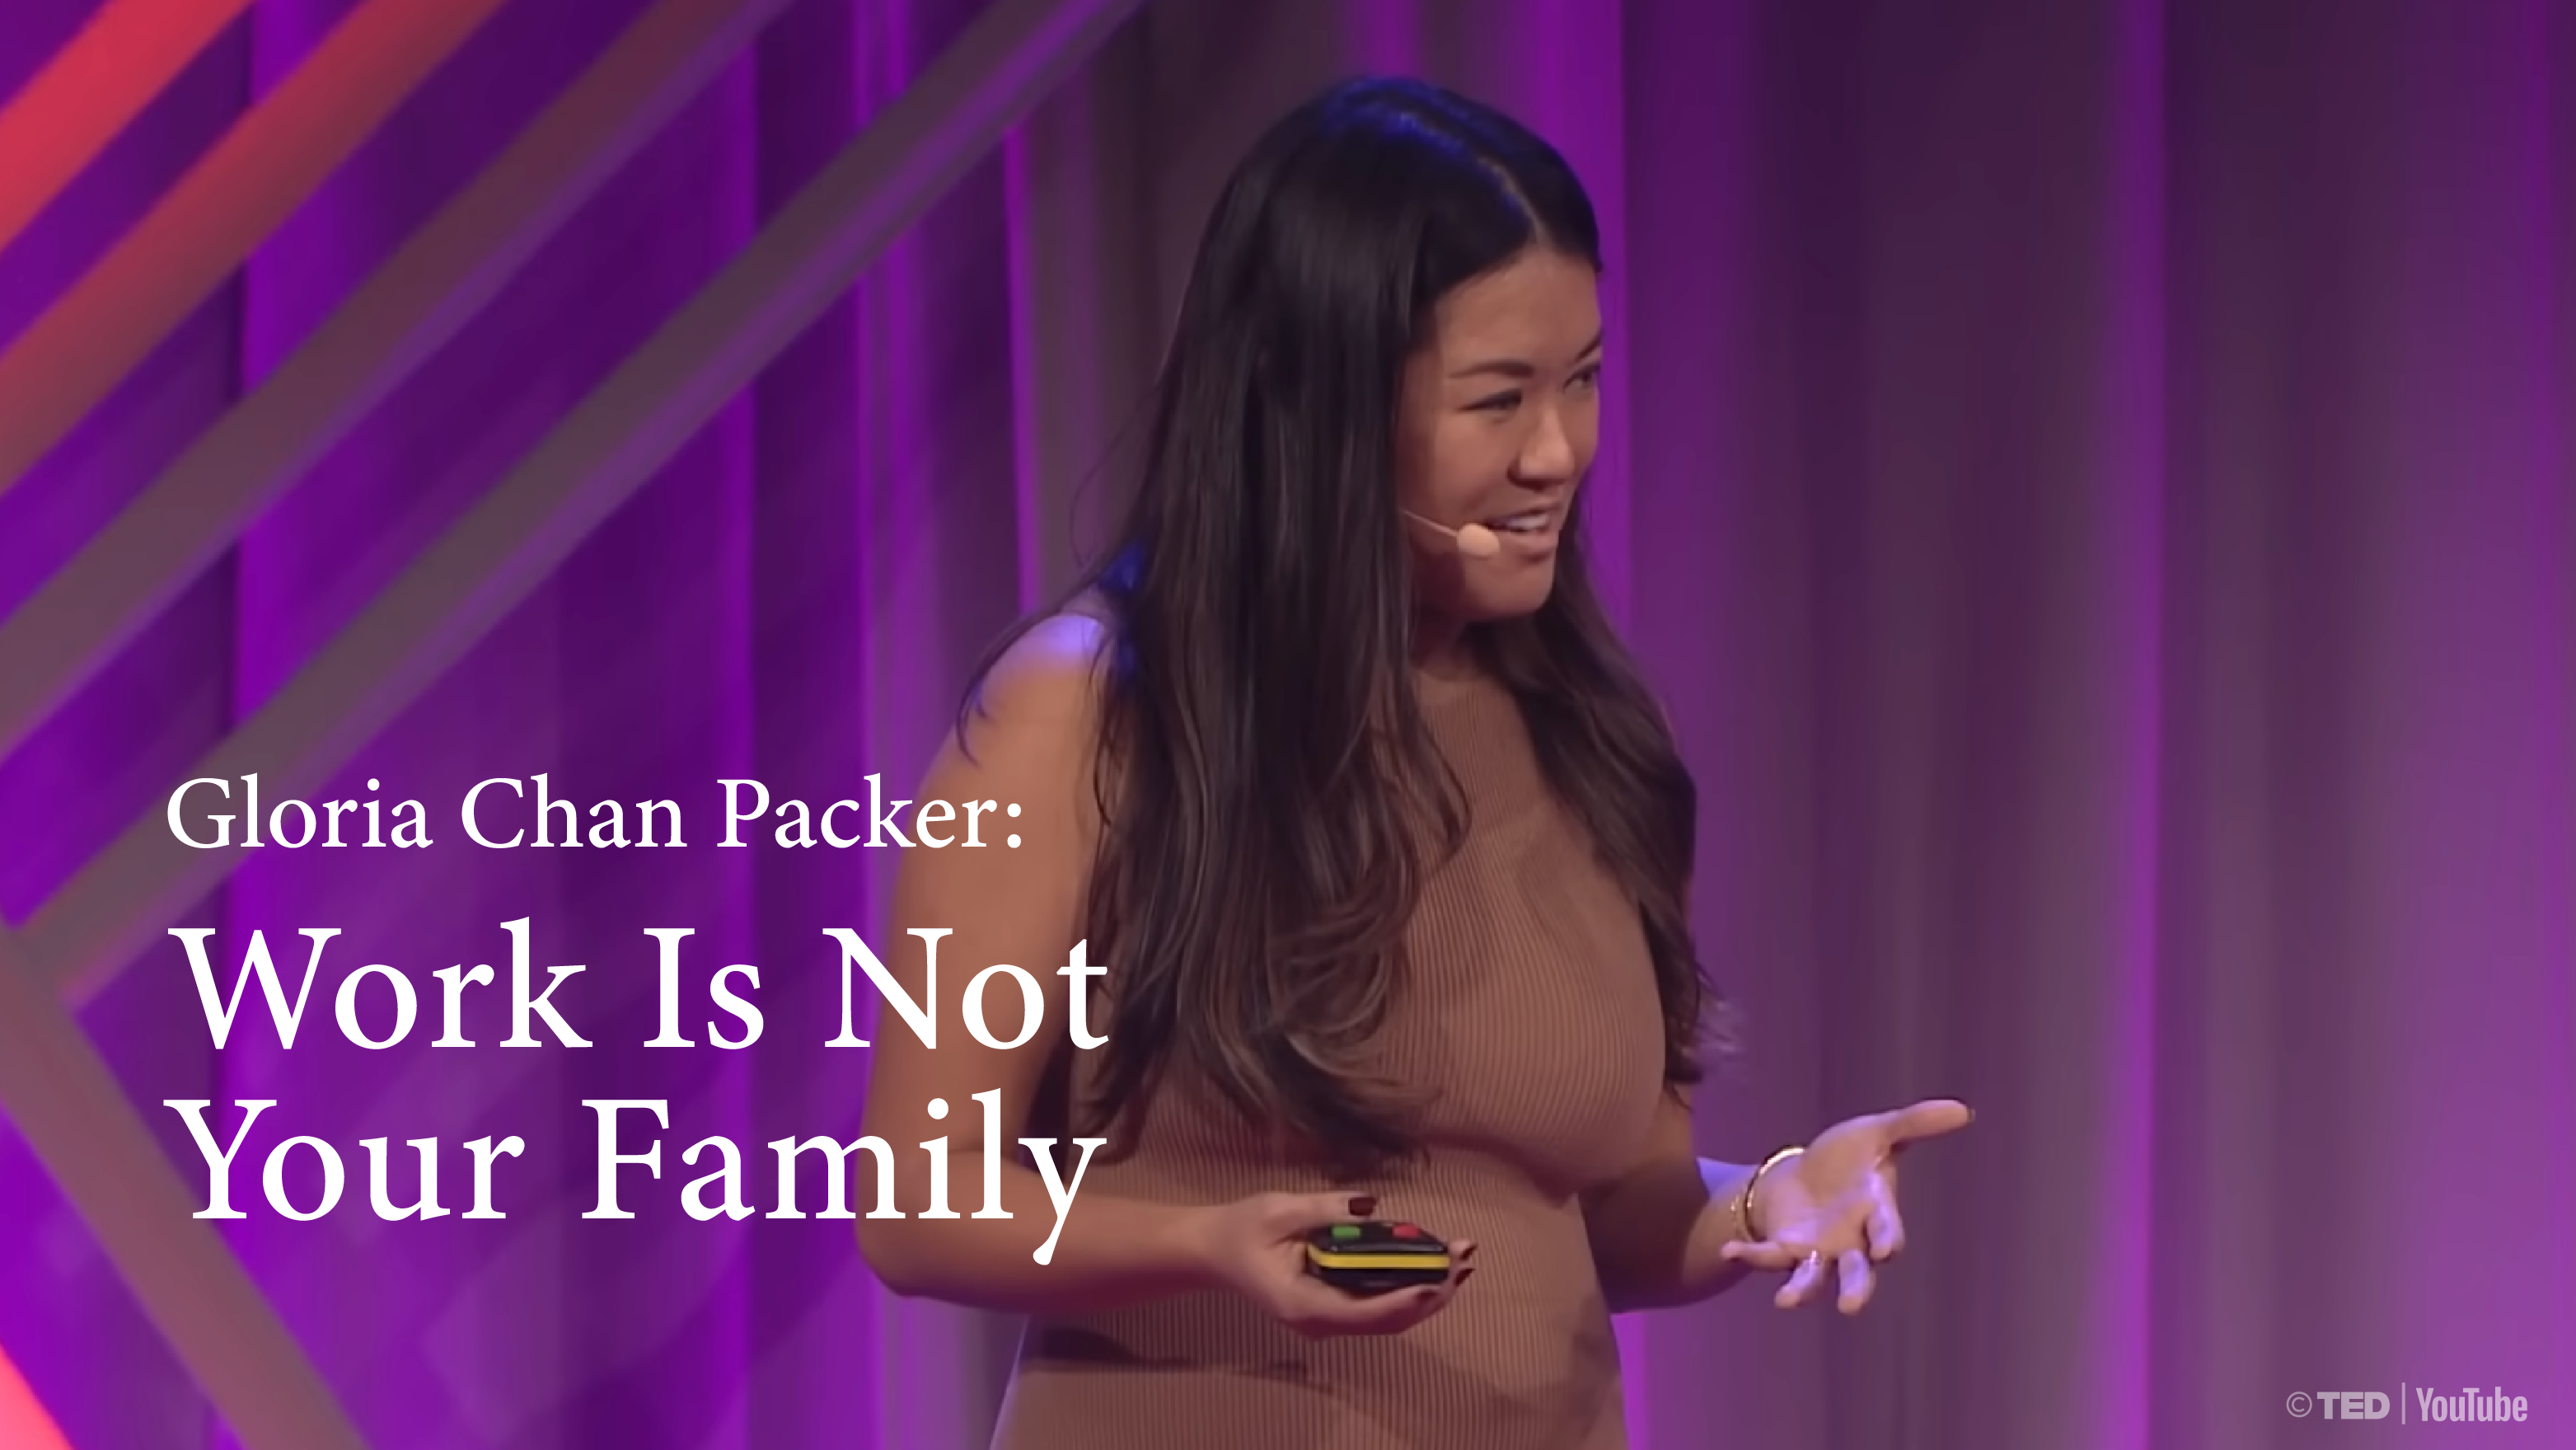 [C+] Work is not your family | Gloria Chan Packer [PRACTICE]